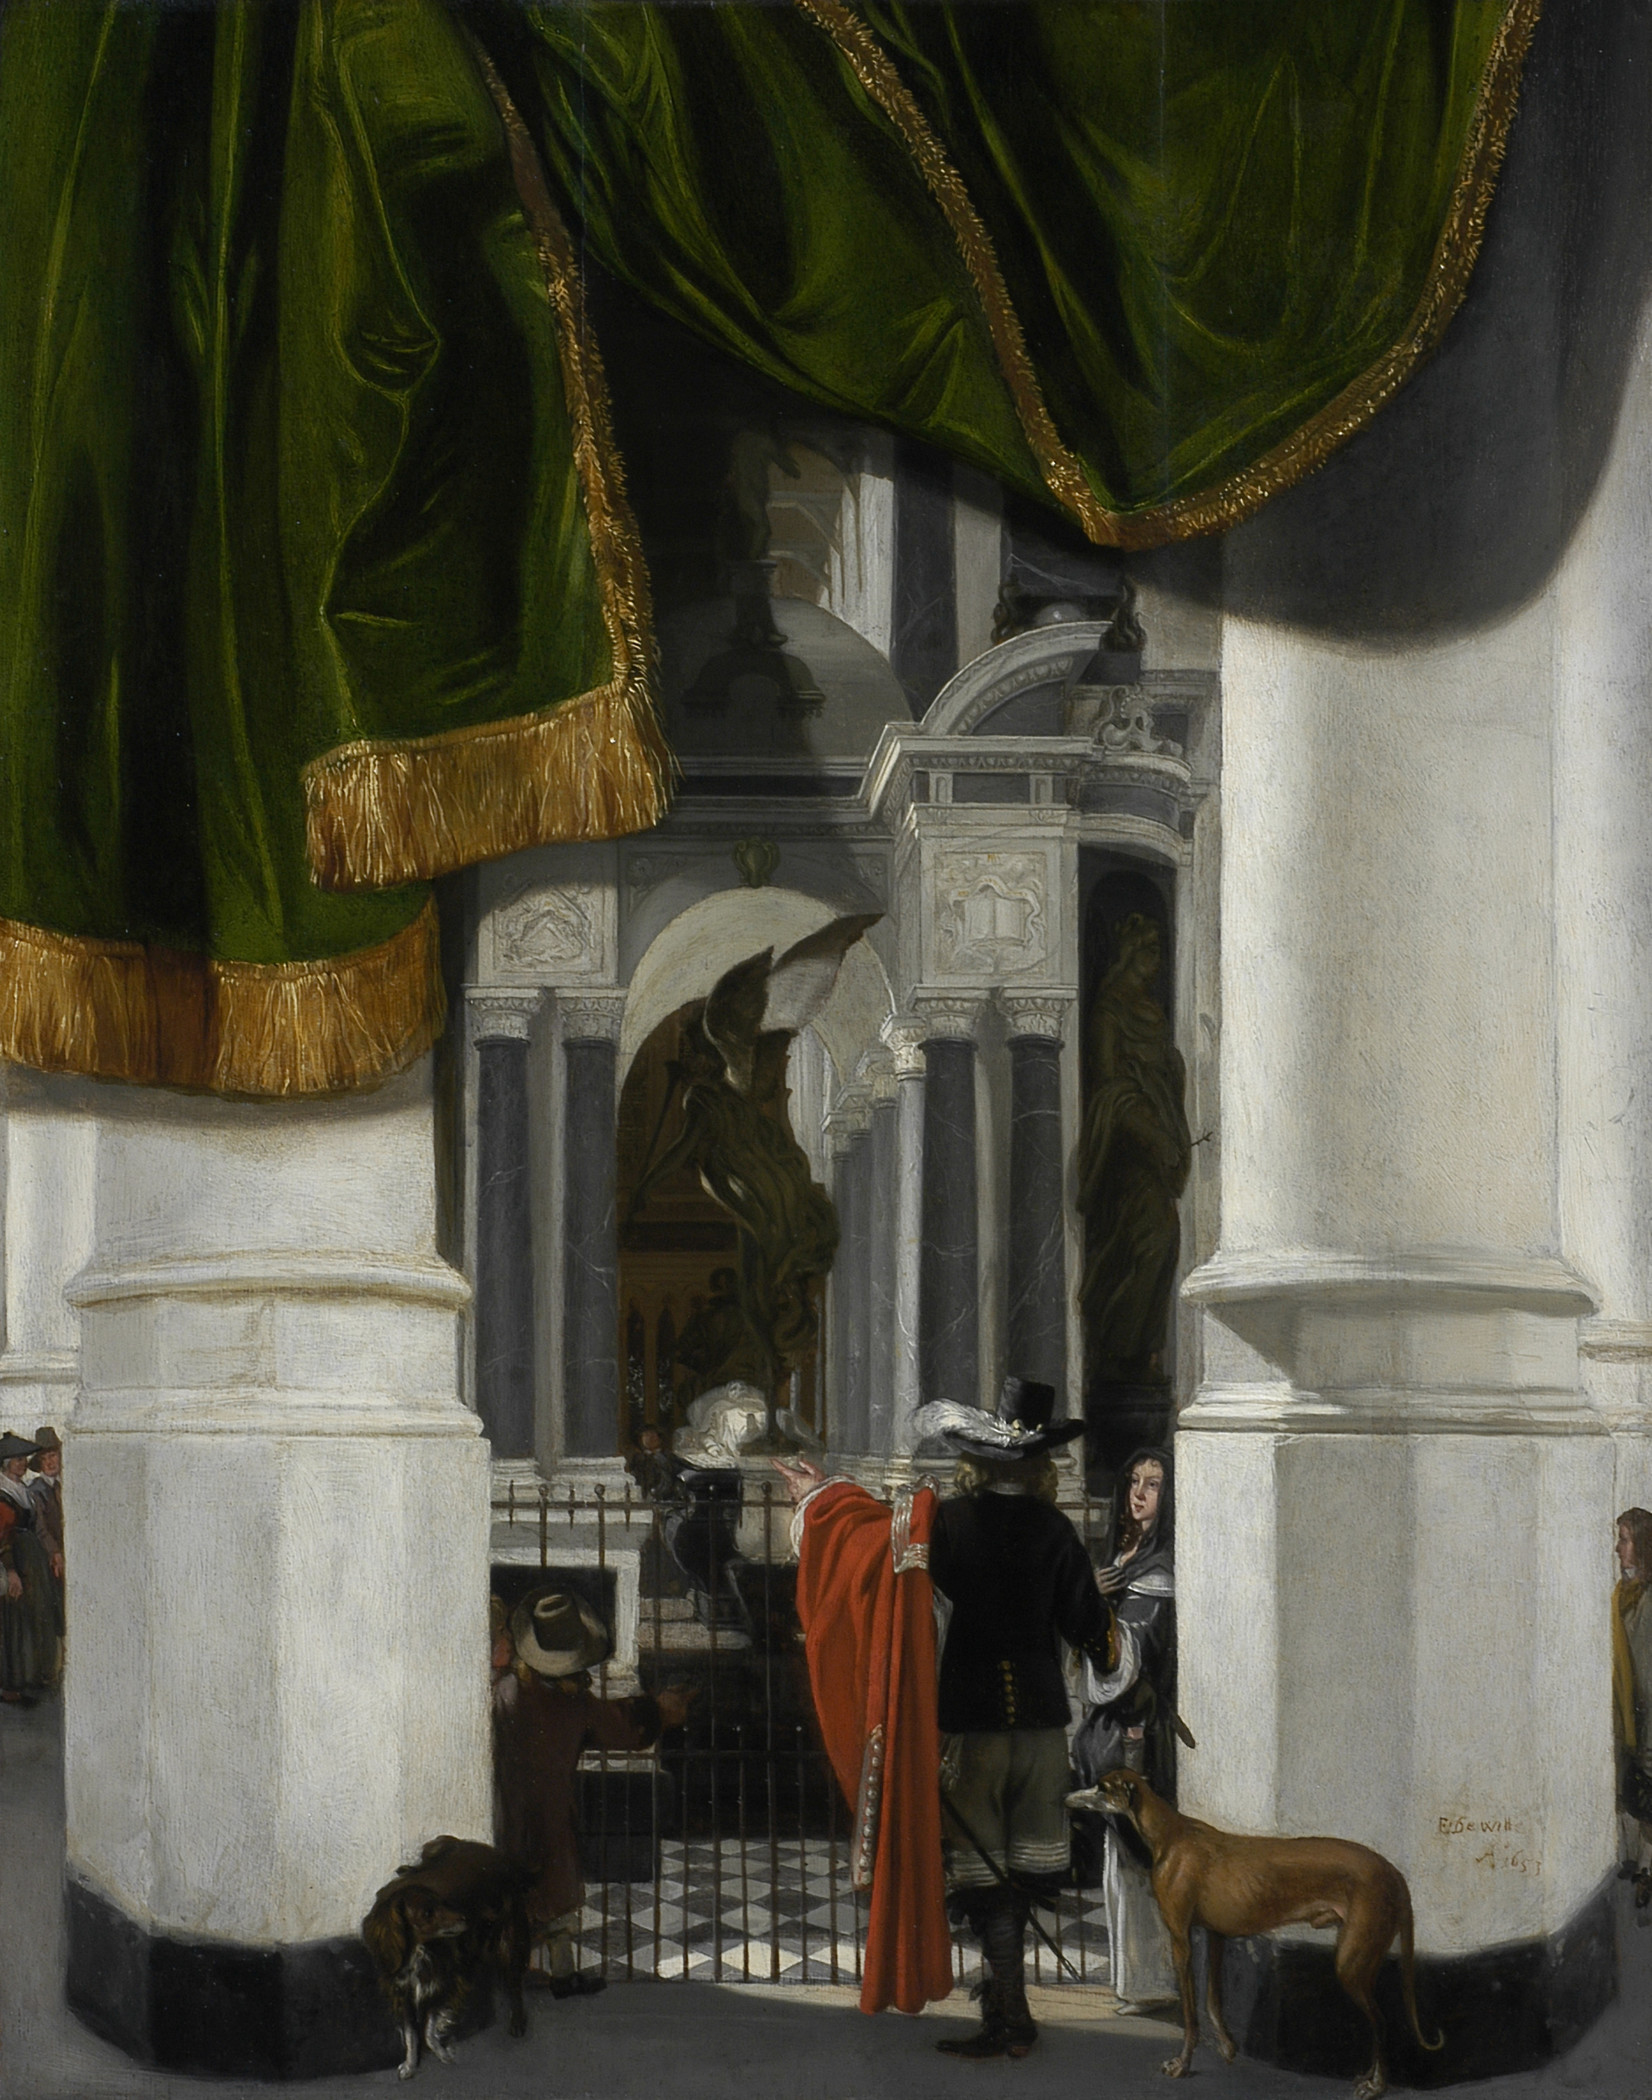 Emmanuel de Witte, Interior of the Nieuwe Kerk in Delft with the Tomb of William the Silent, 1653, Los Angeles County Museum of Art, Gift of Mr. and Mrs. Edward W. Carter [(M.2003.108.5)](http://collections.lacma.org/node/209228)